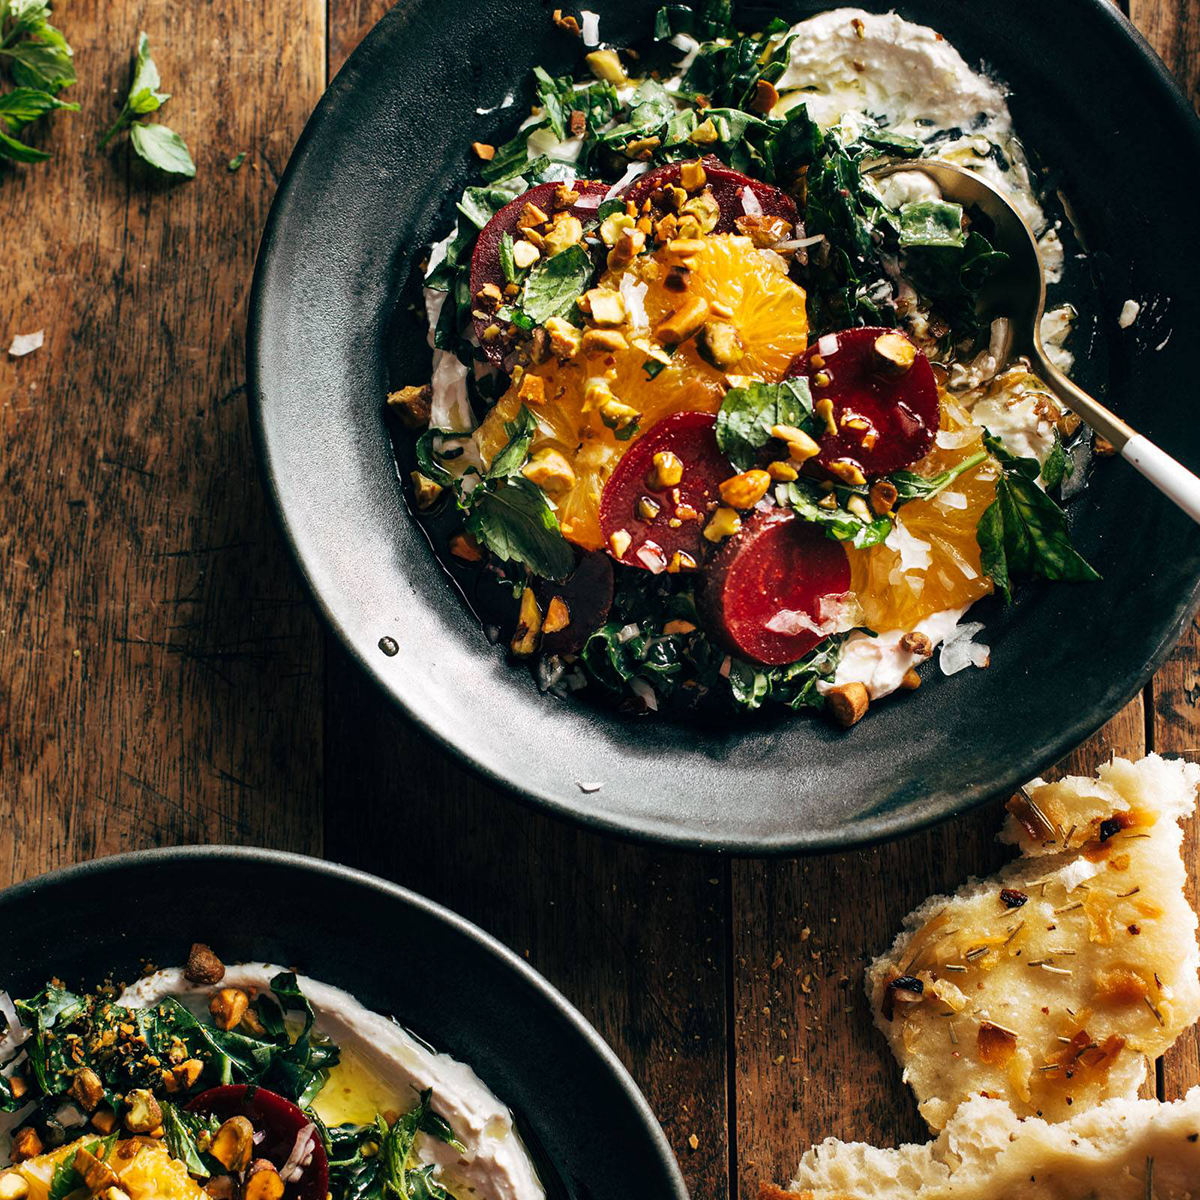 Bowl with kale, beets, oranges, and creamy cheese with a spoon.